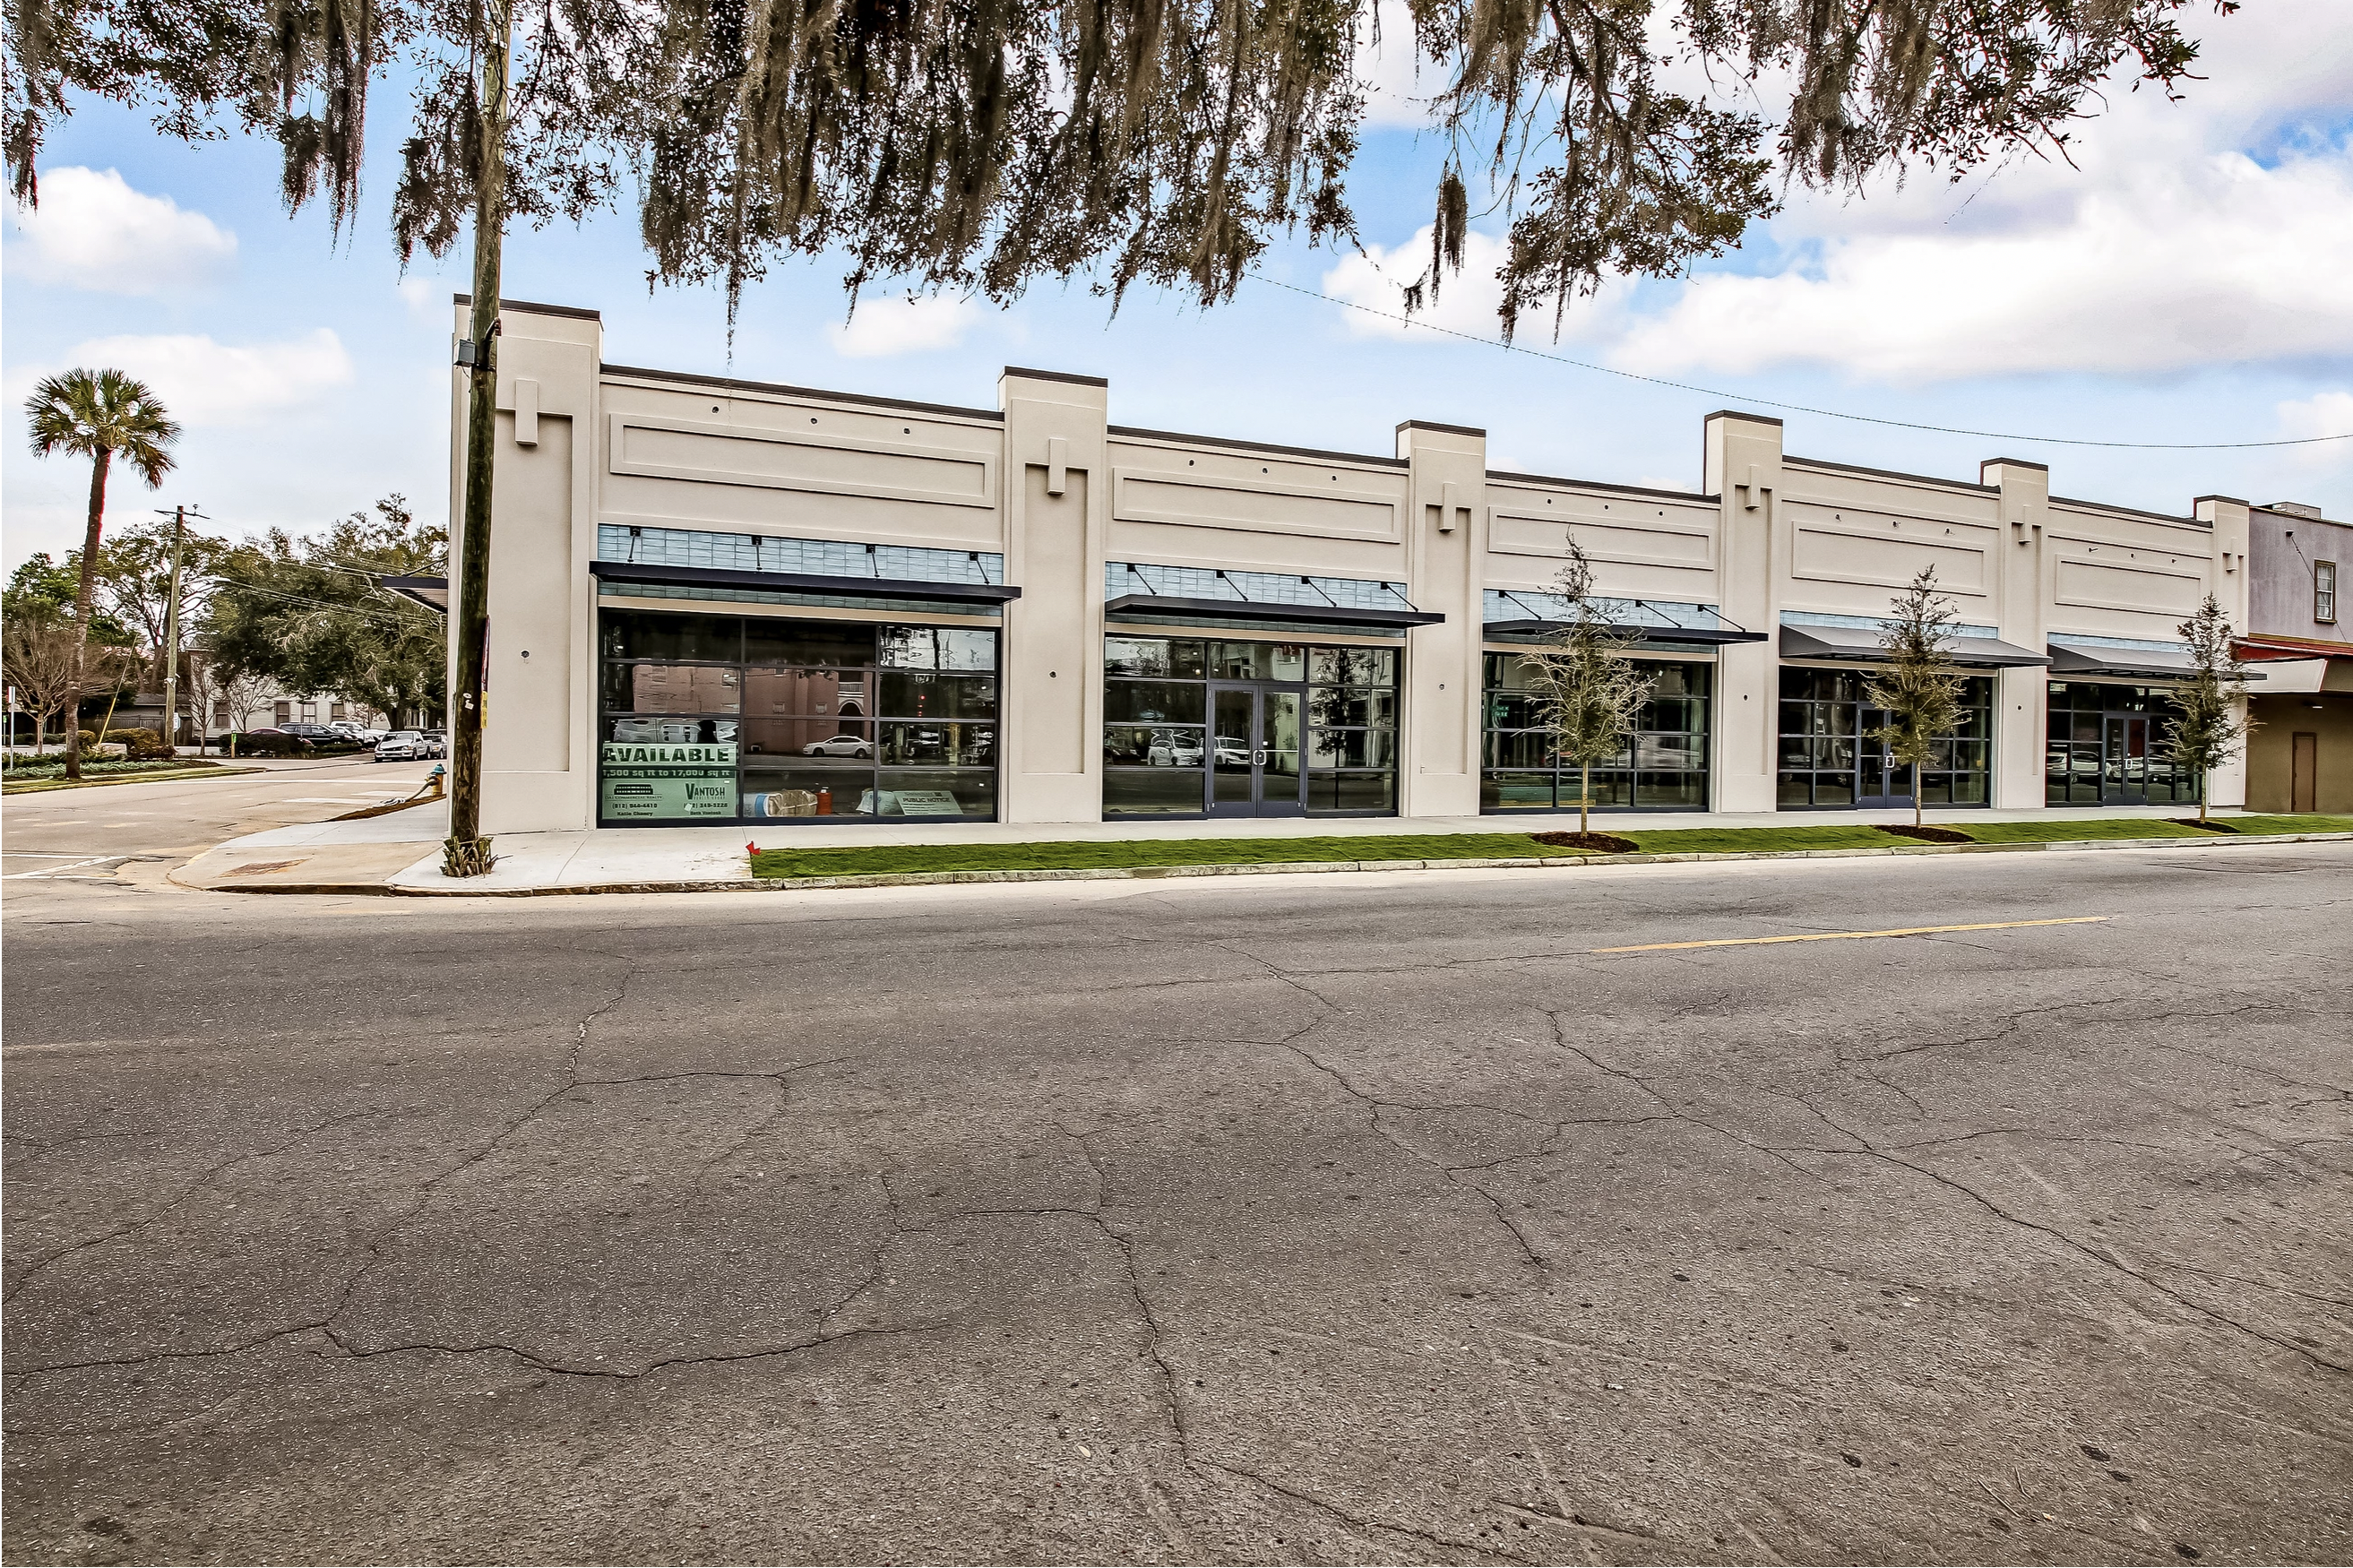 Featured image for “STATION 24- 2400 BULL ST. | Savannah, GA 31401”